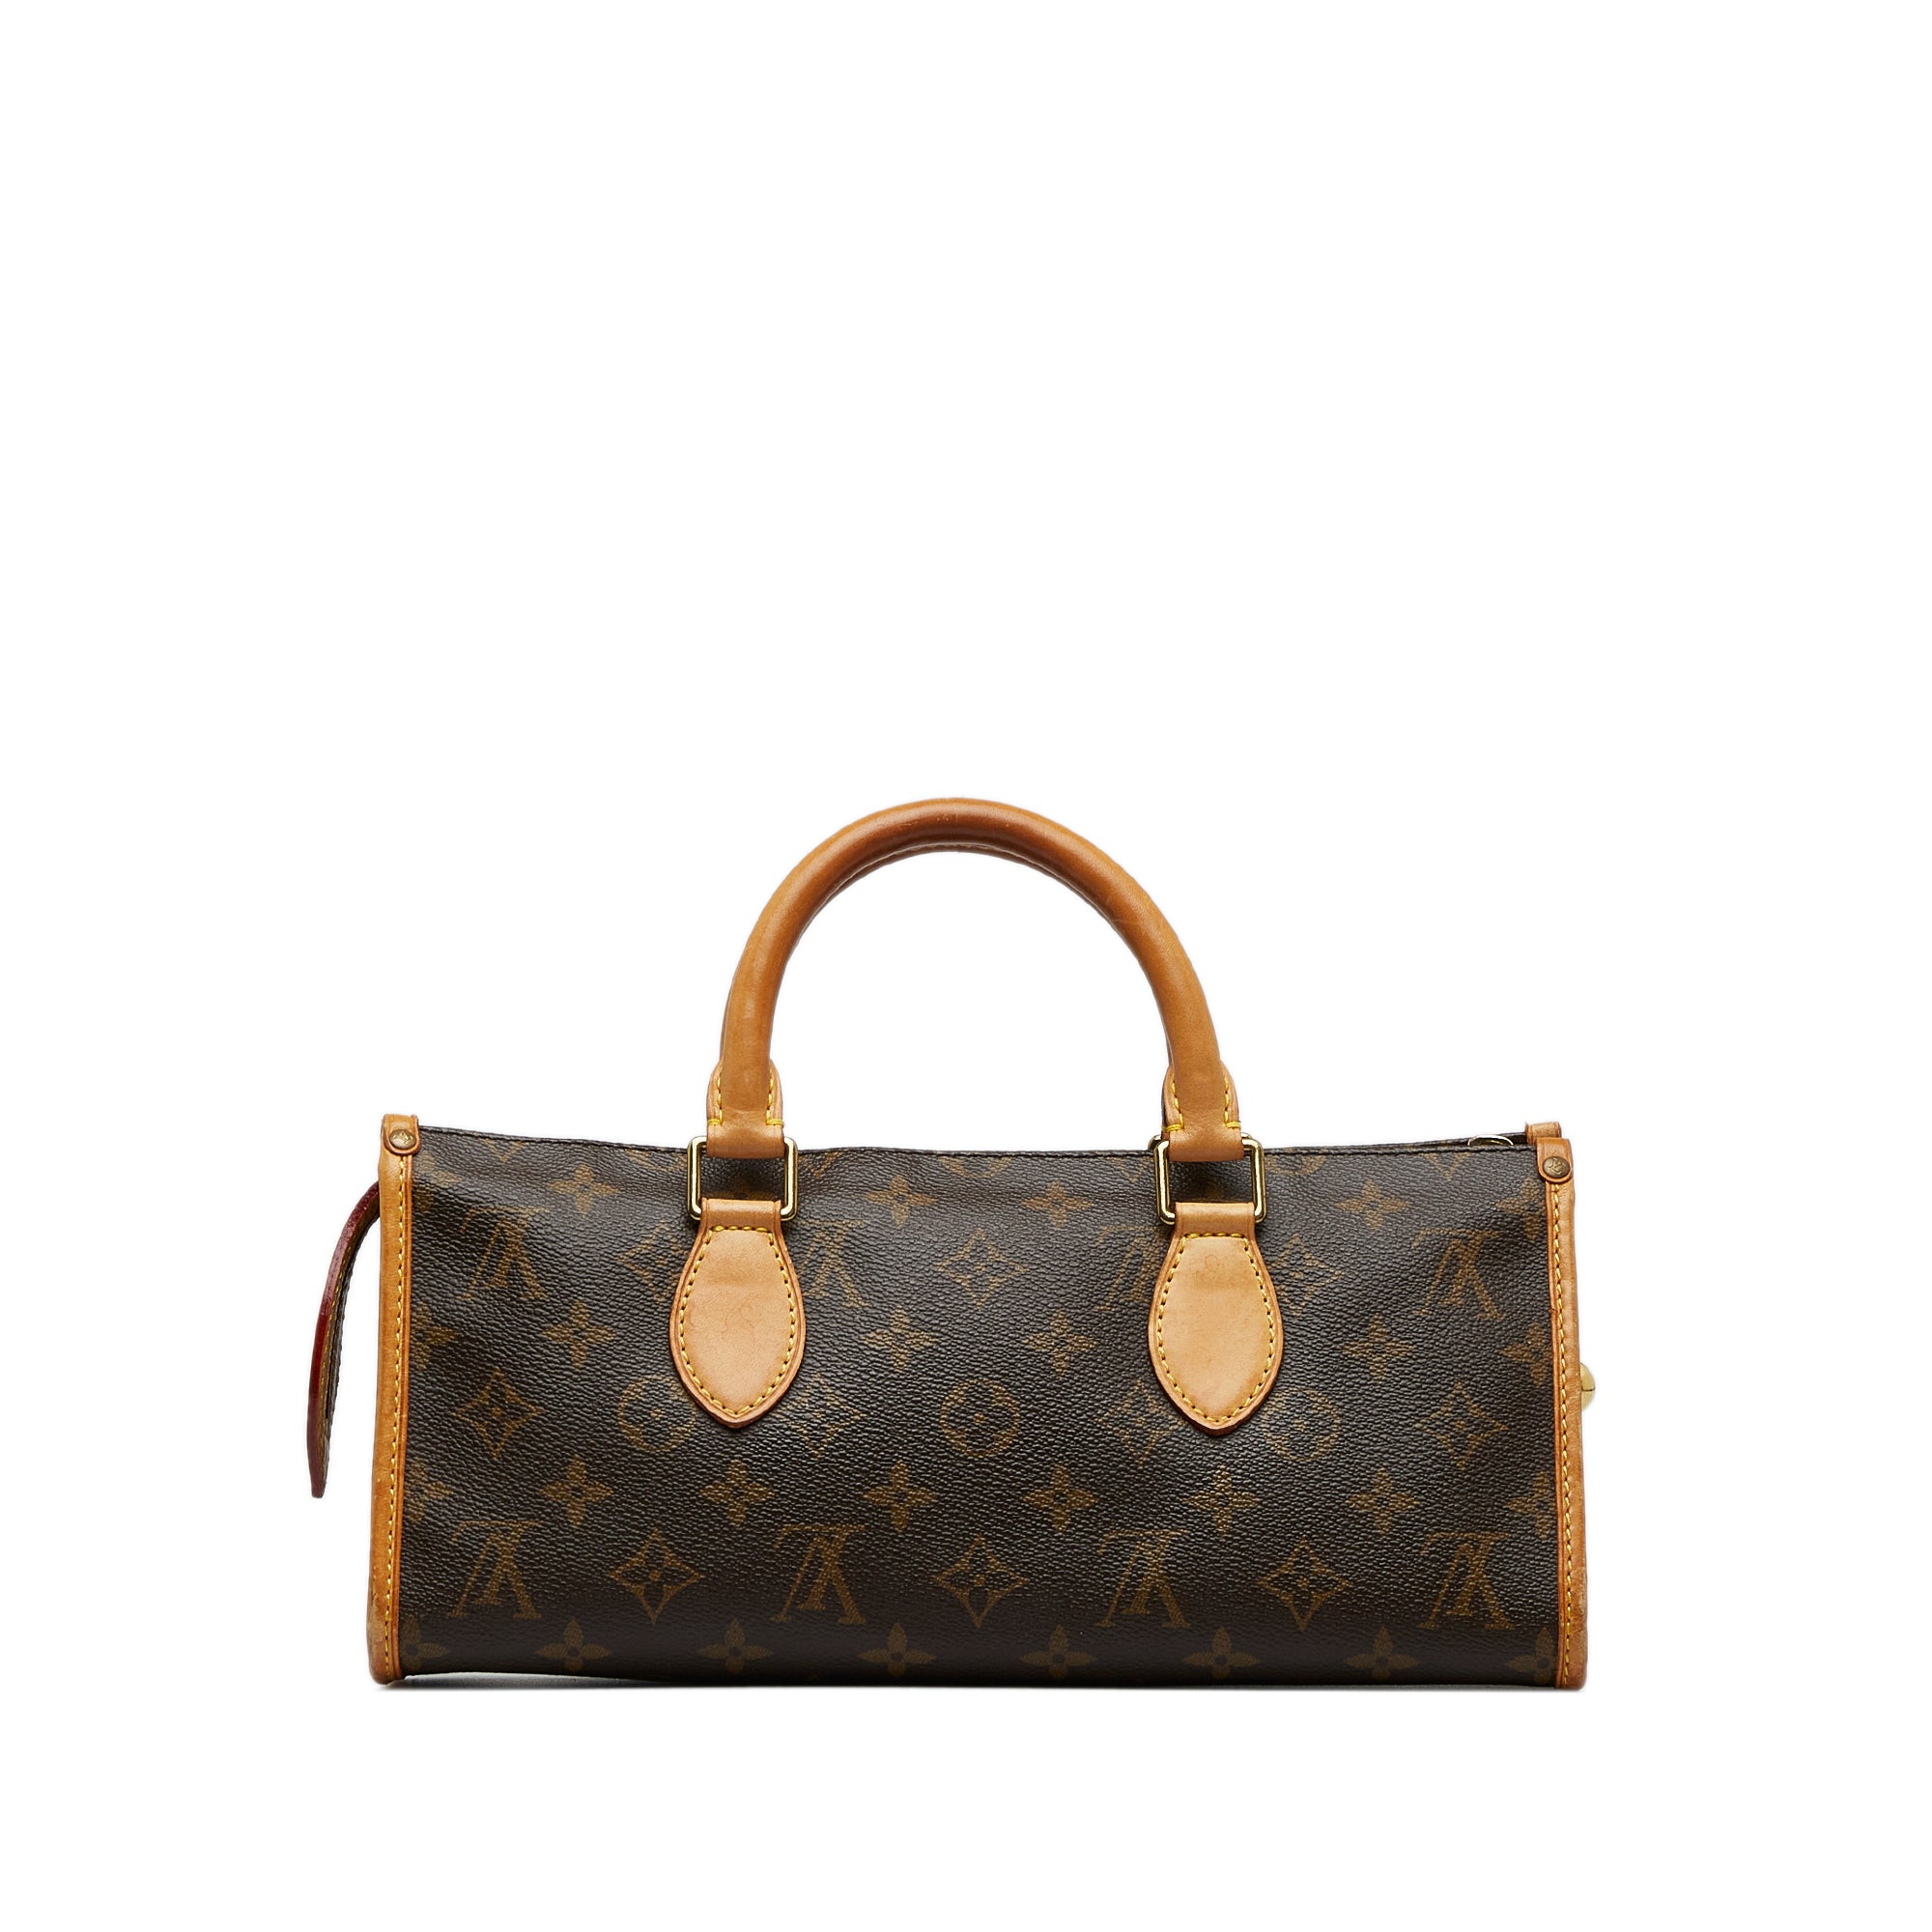 Louis Vuitton - Authenticated Popincourt Handbag - Leather Brown for Women, Very Good Condition